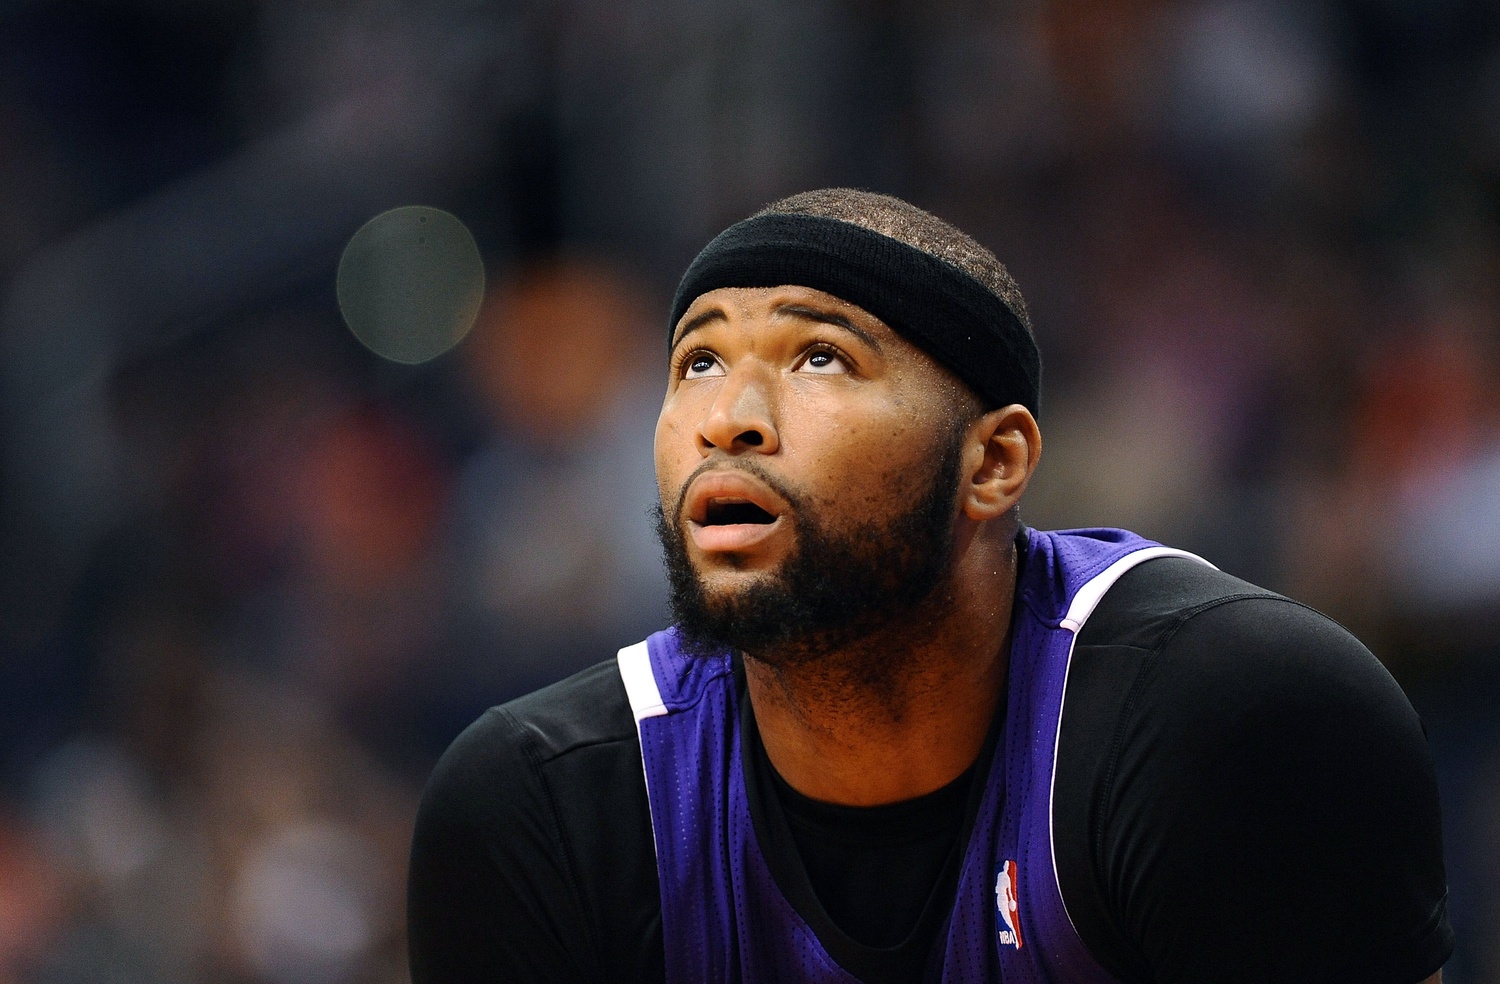 Five Teams That Could Make a Trade for DeMarcus Cousins